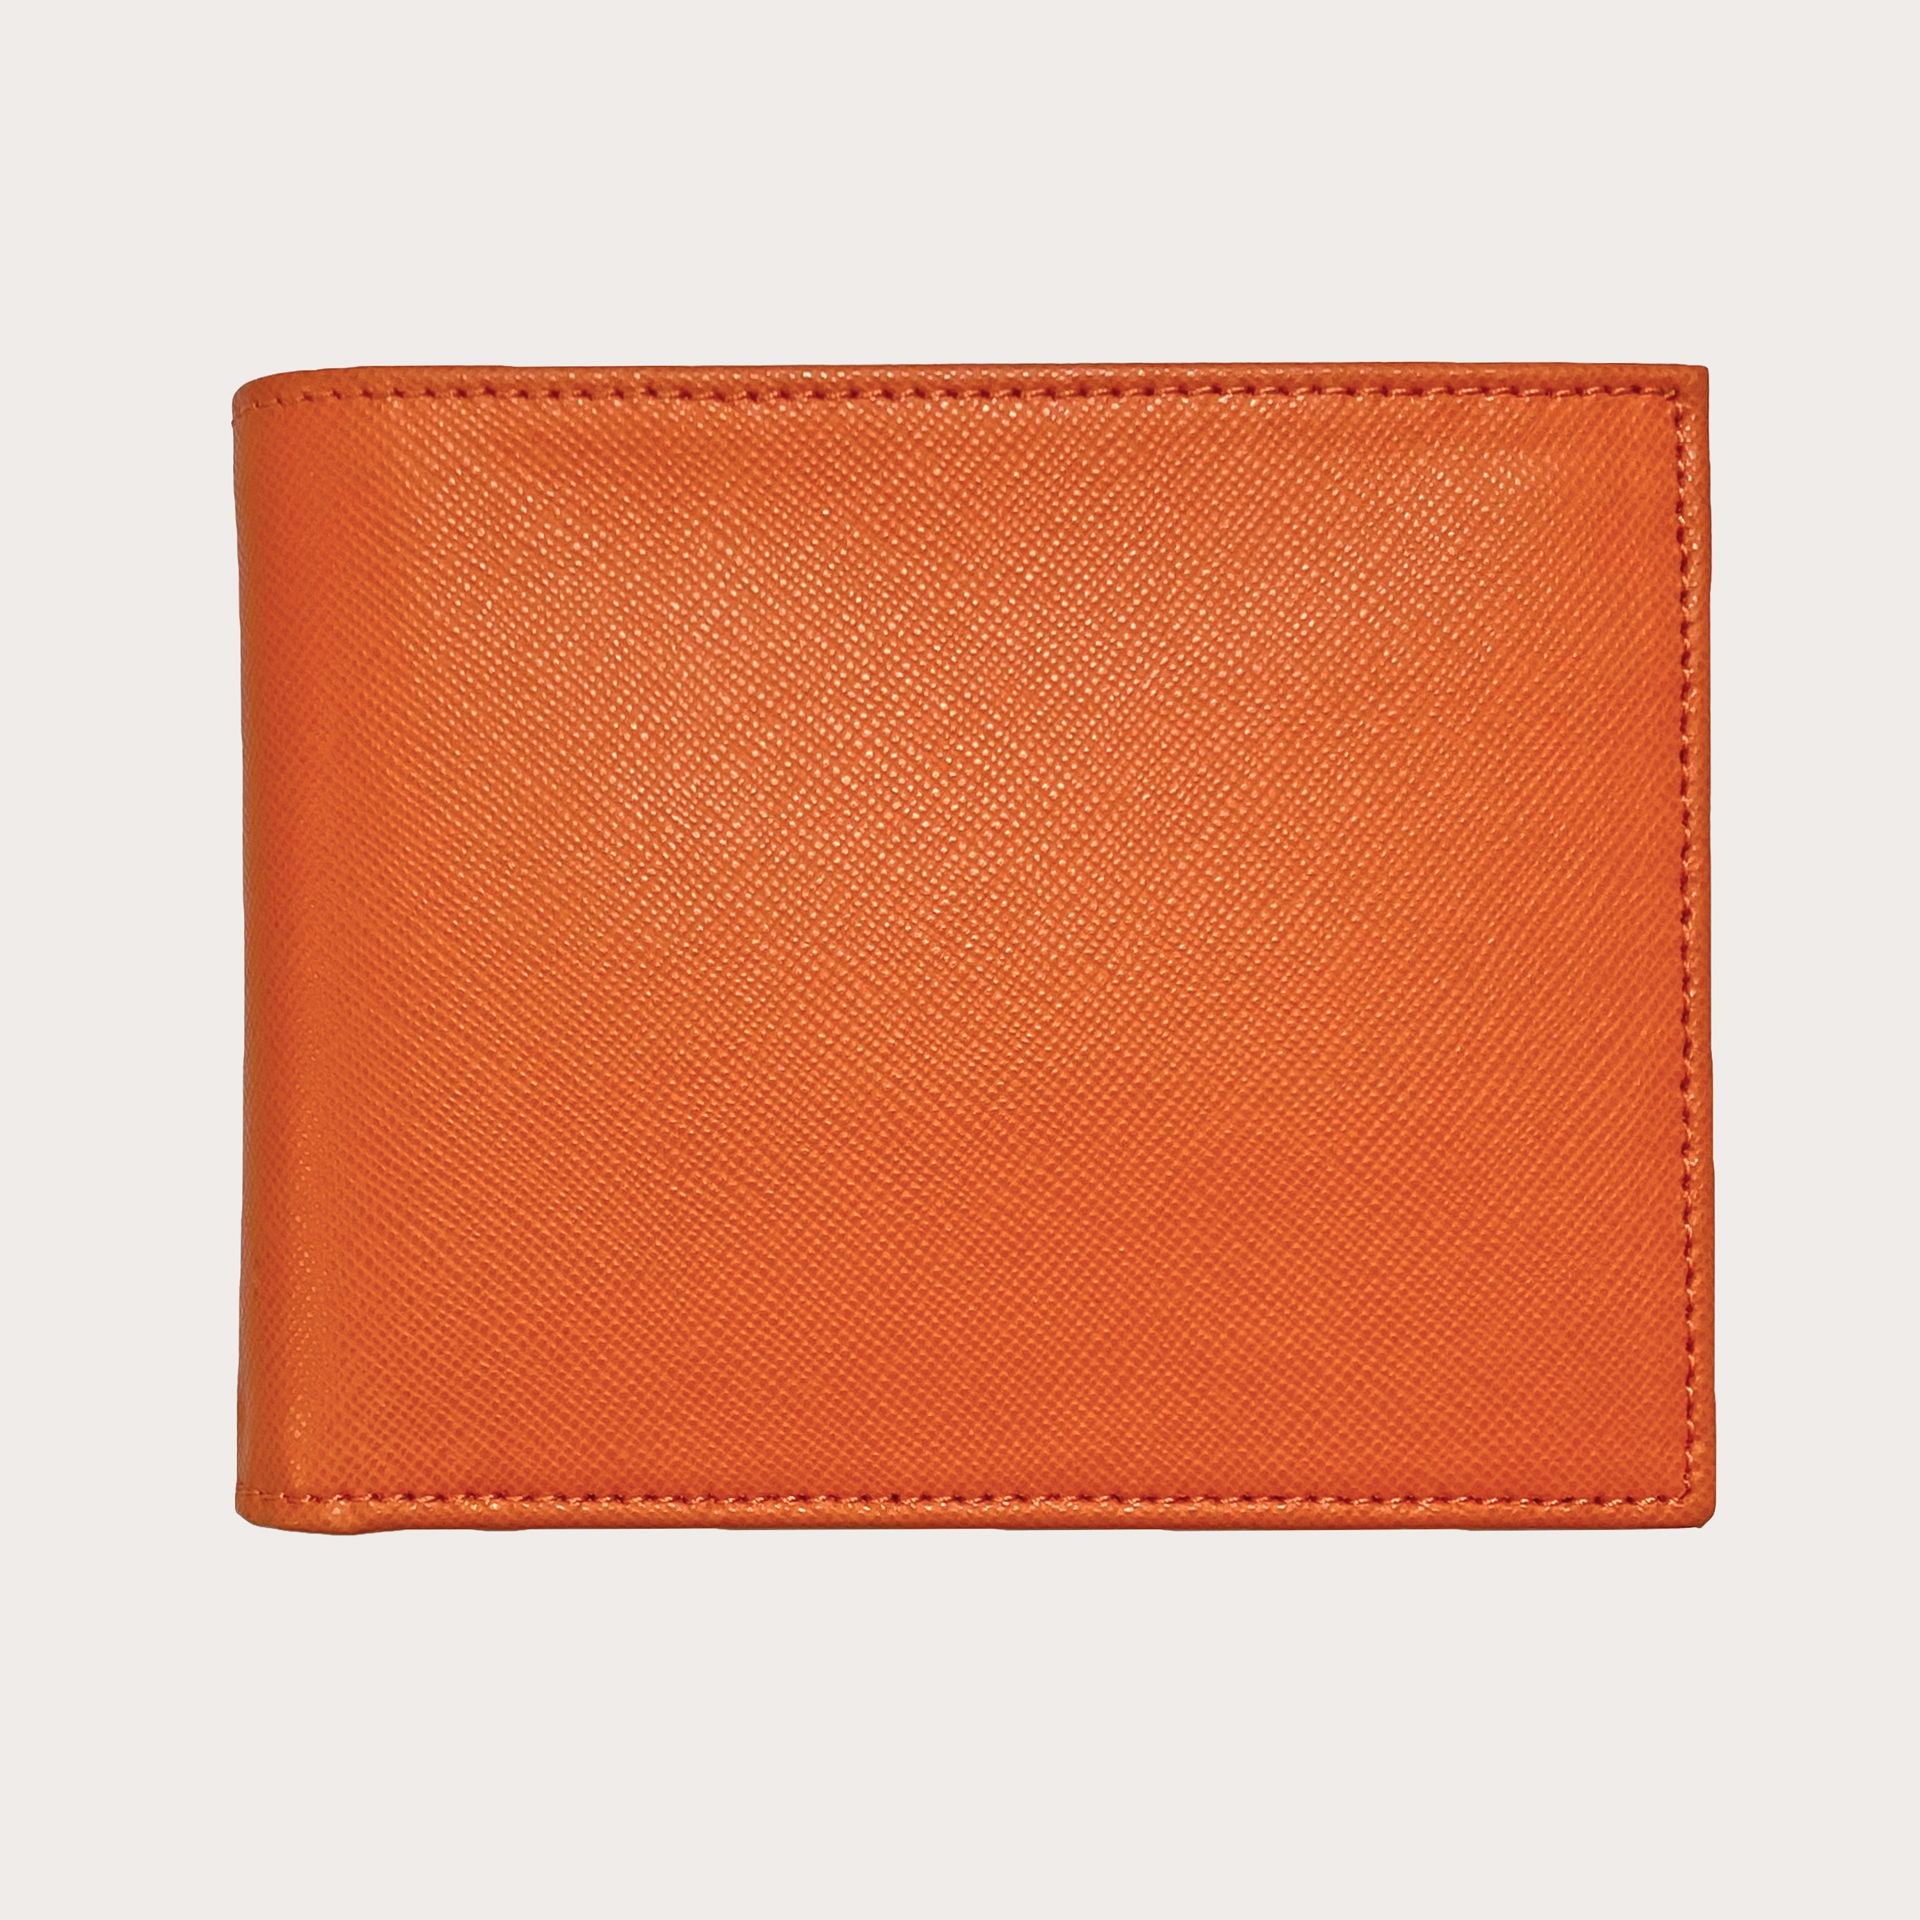 BRUCLE Men's bifold leather wallet with flap, saffiano orange